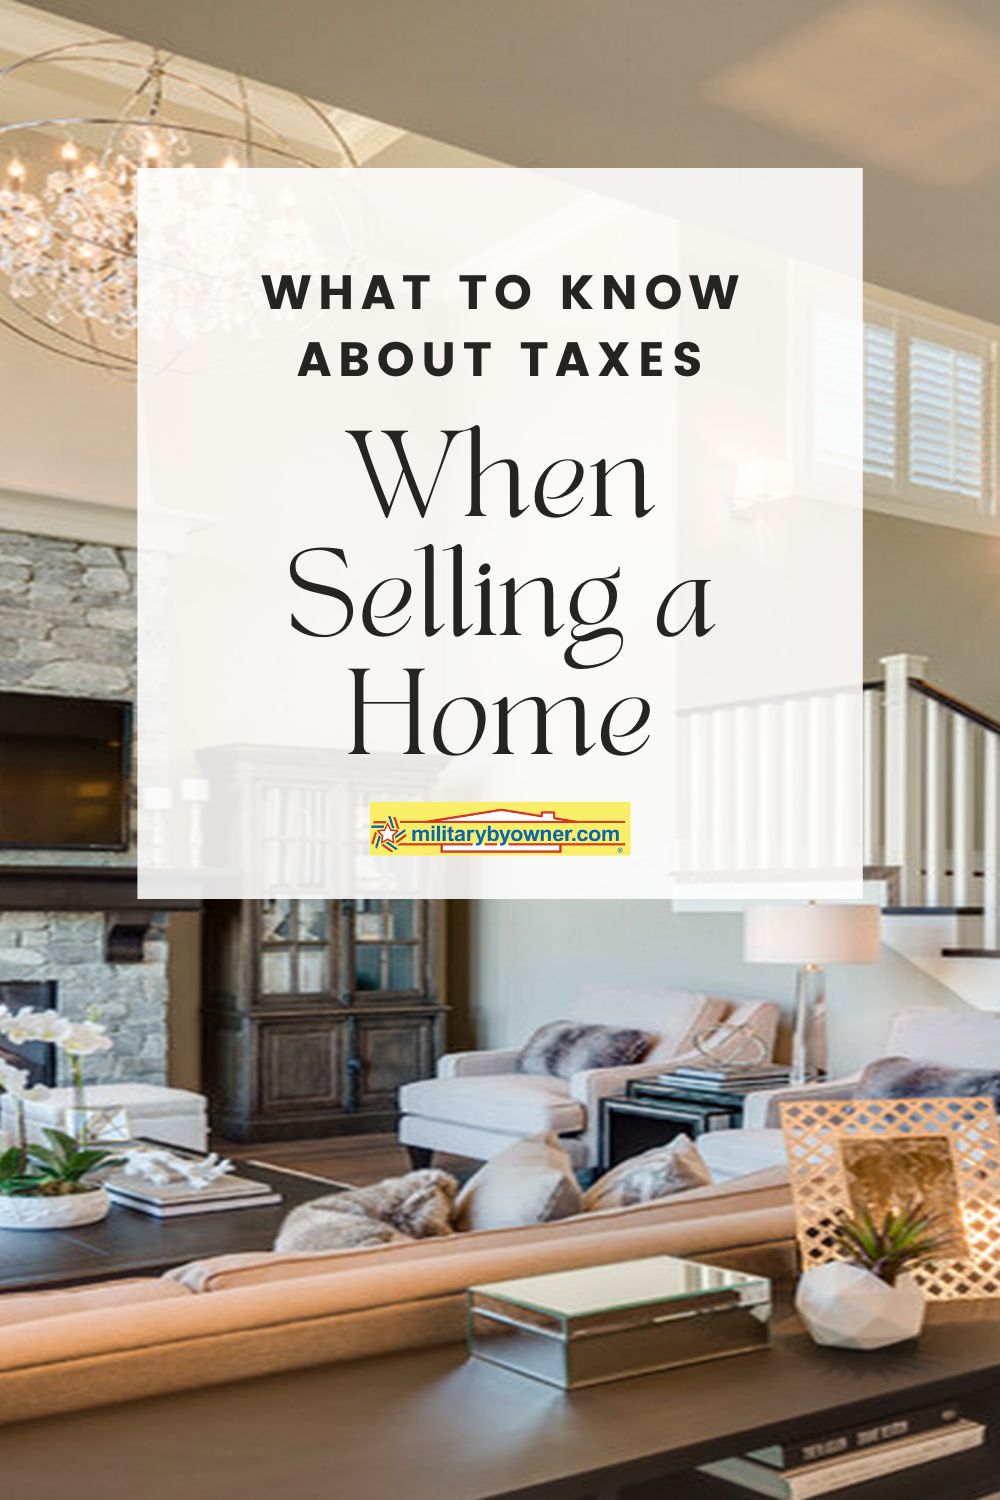 RA_What_to_Know_About_Taxes_When_Selling_a_Home